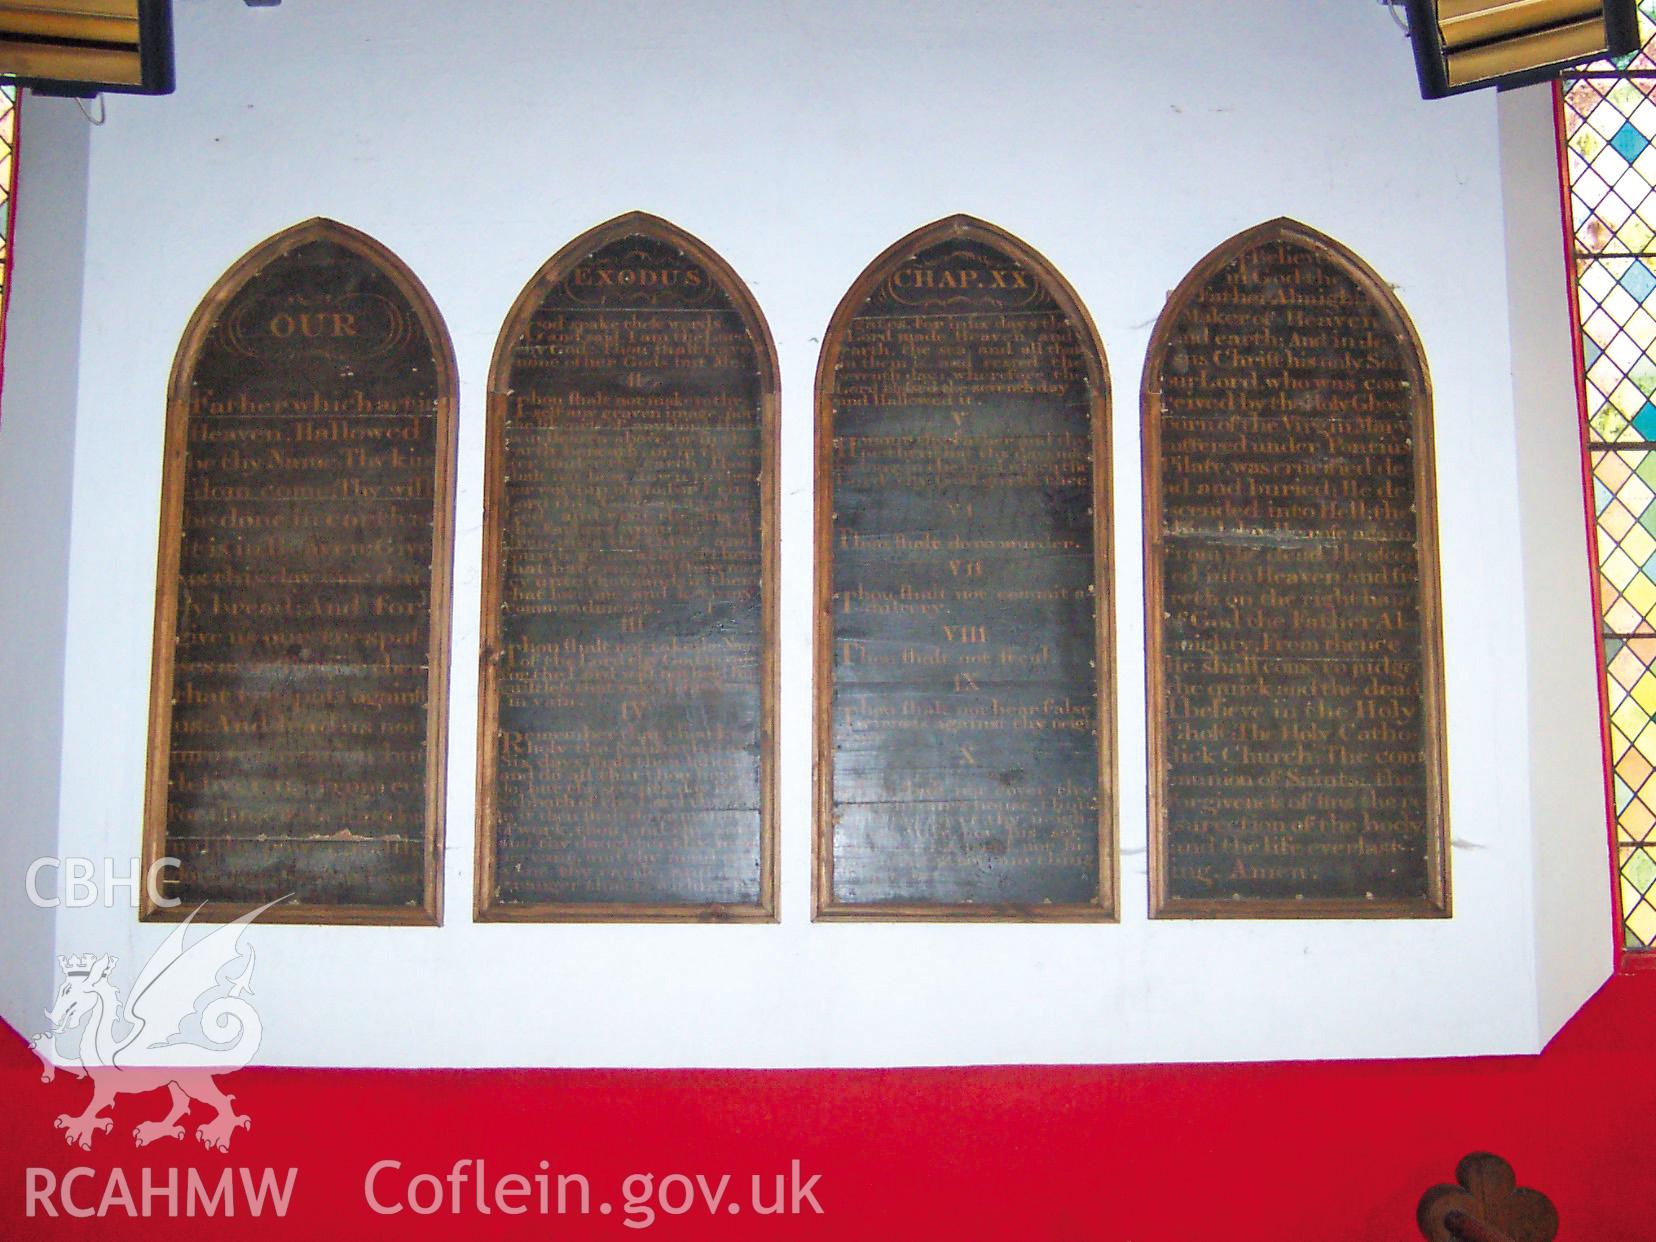 Colour digital photograph of plaques on an interior church wall, displaying the ten commandments.